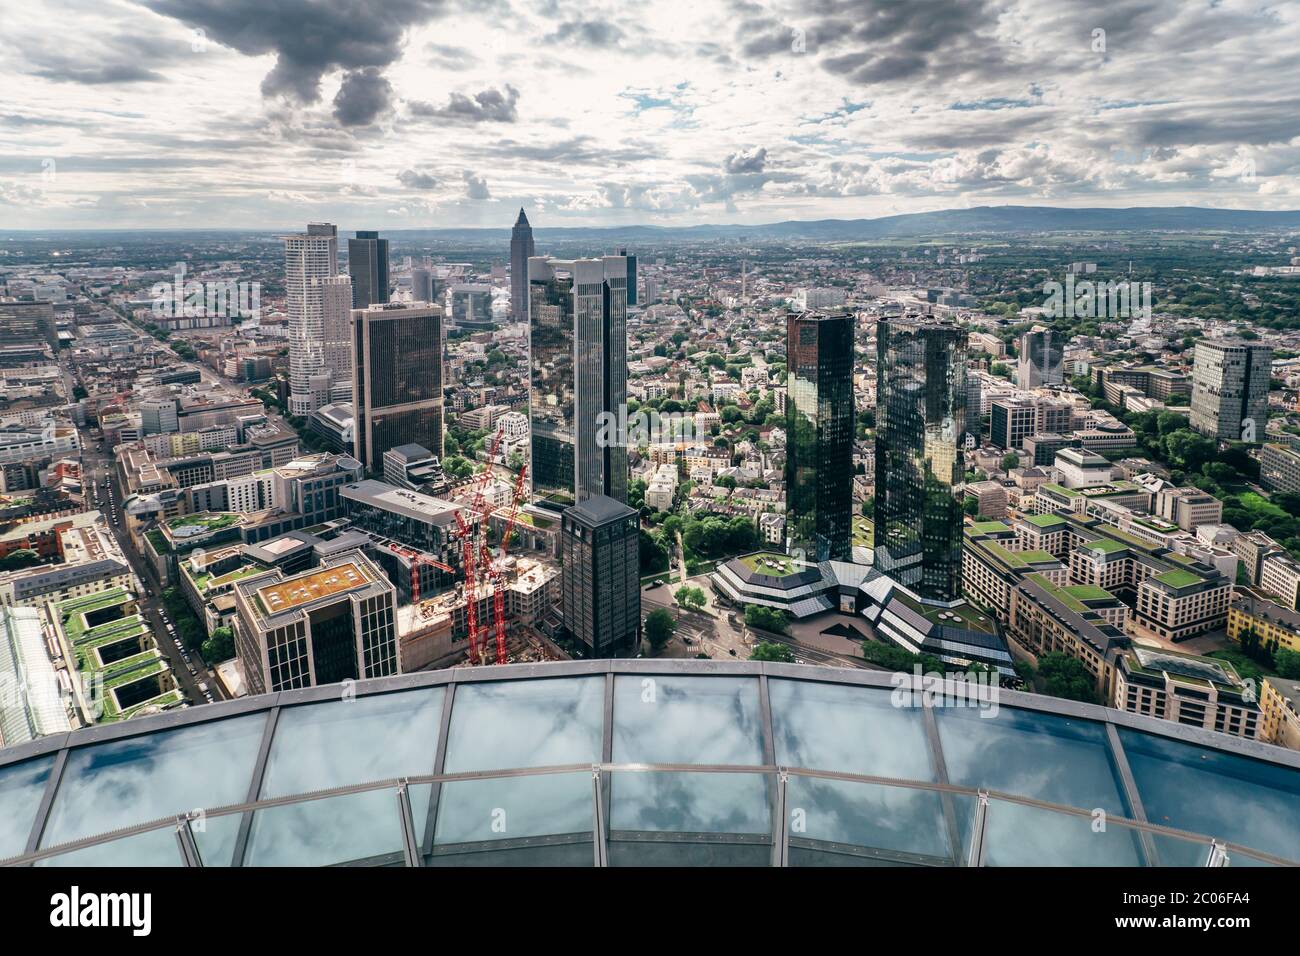 Panorama of Frankfurt with skyscrapers, view from the Main Tower, Frankfurt am Main, Germany Stock Photo